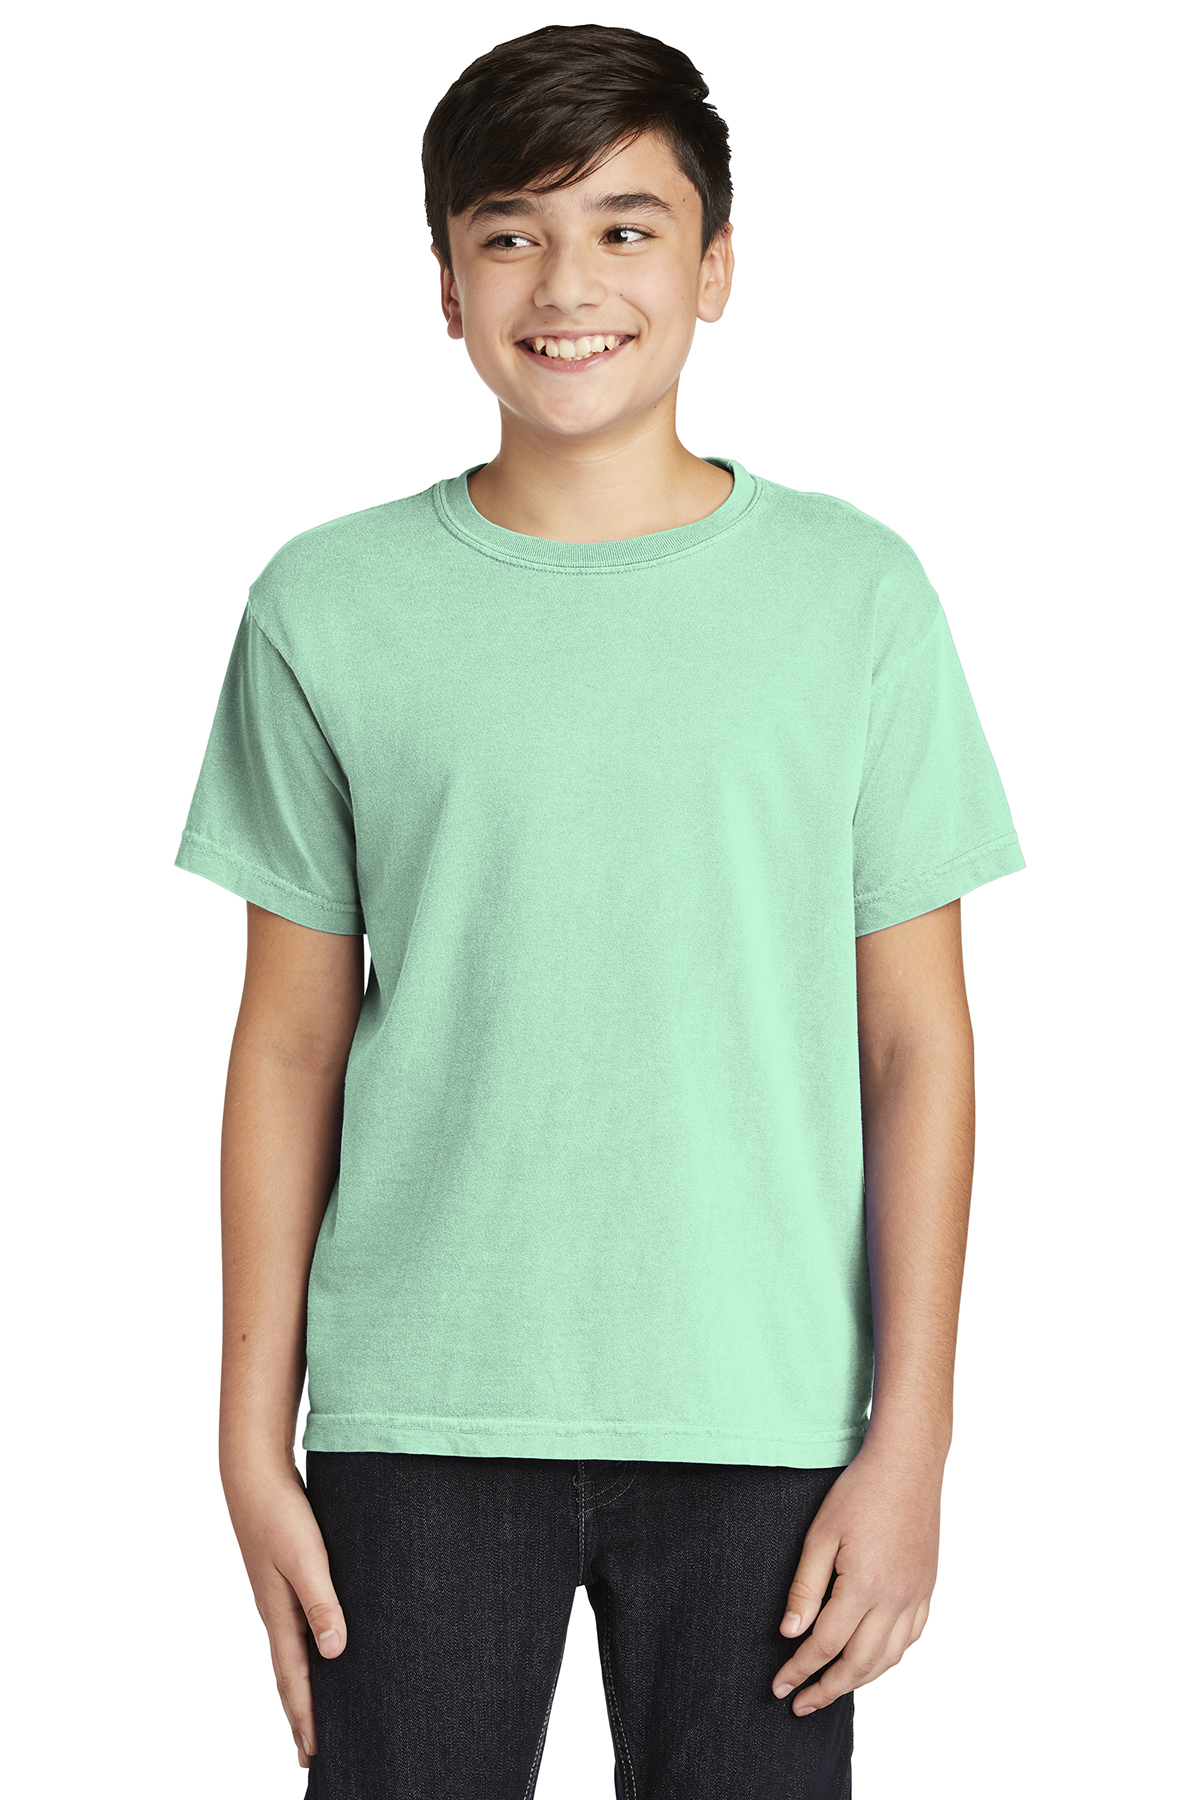 Restock! | Made for More Premium Comfort Color Tee | Moss Green XL